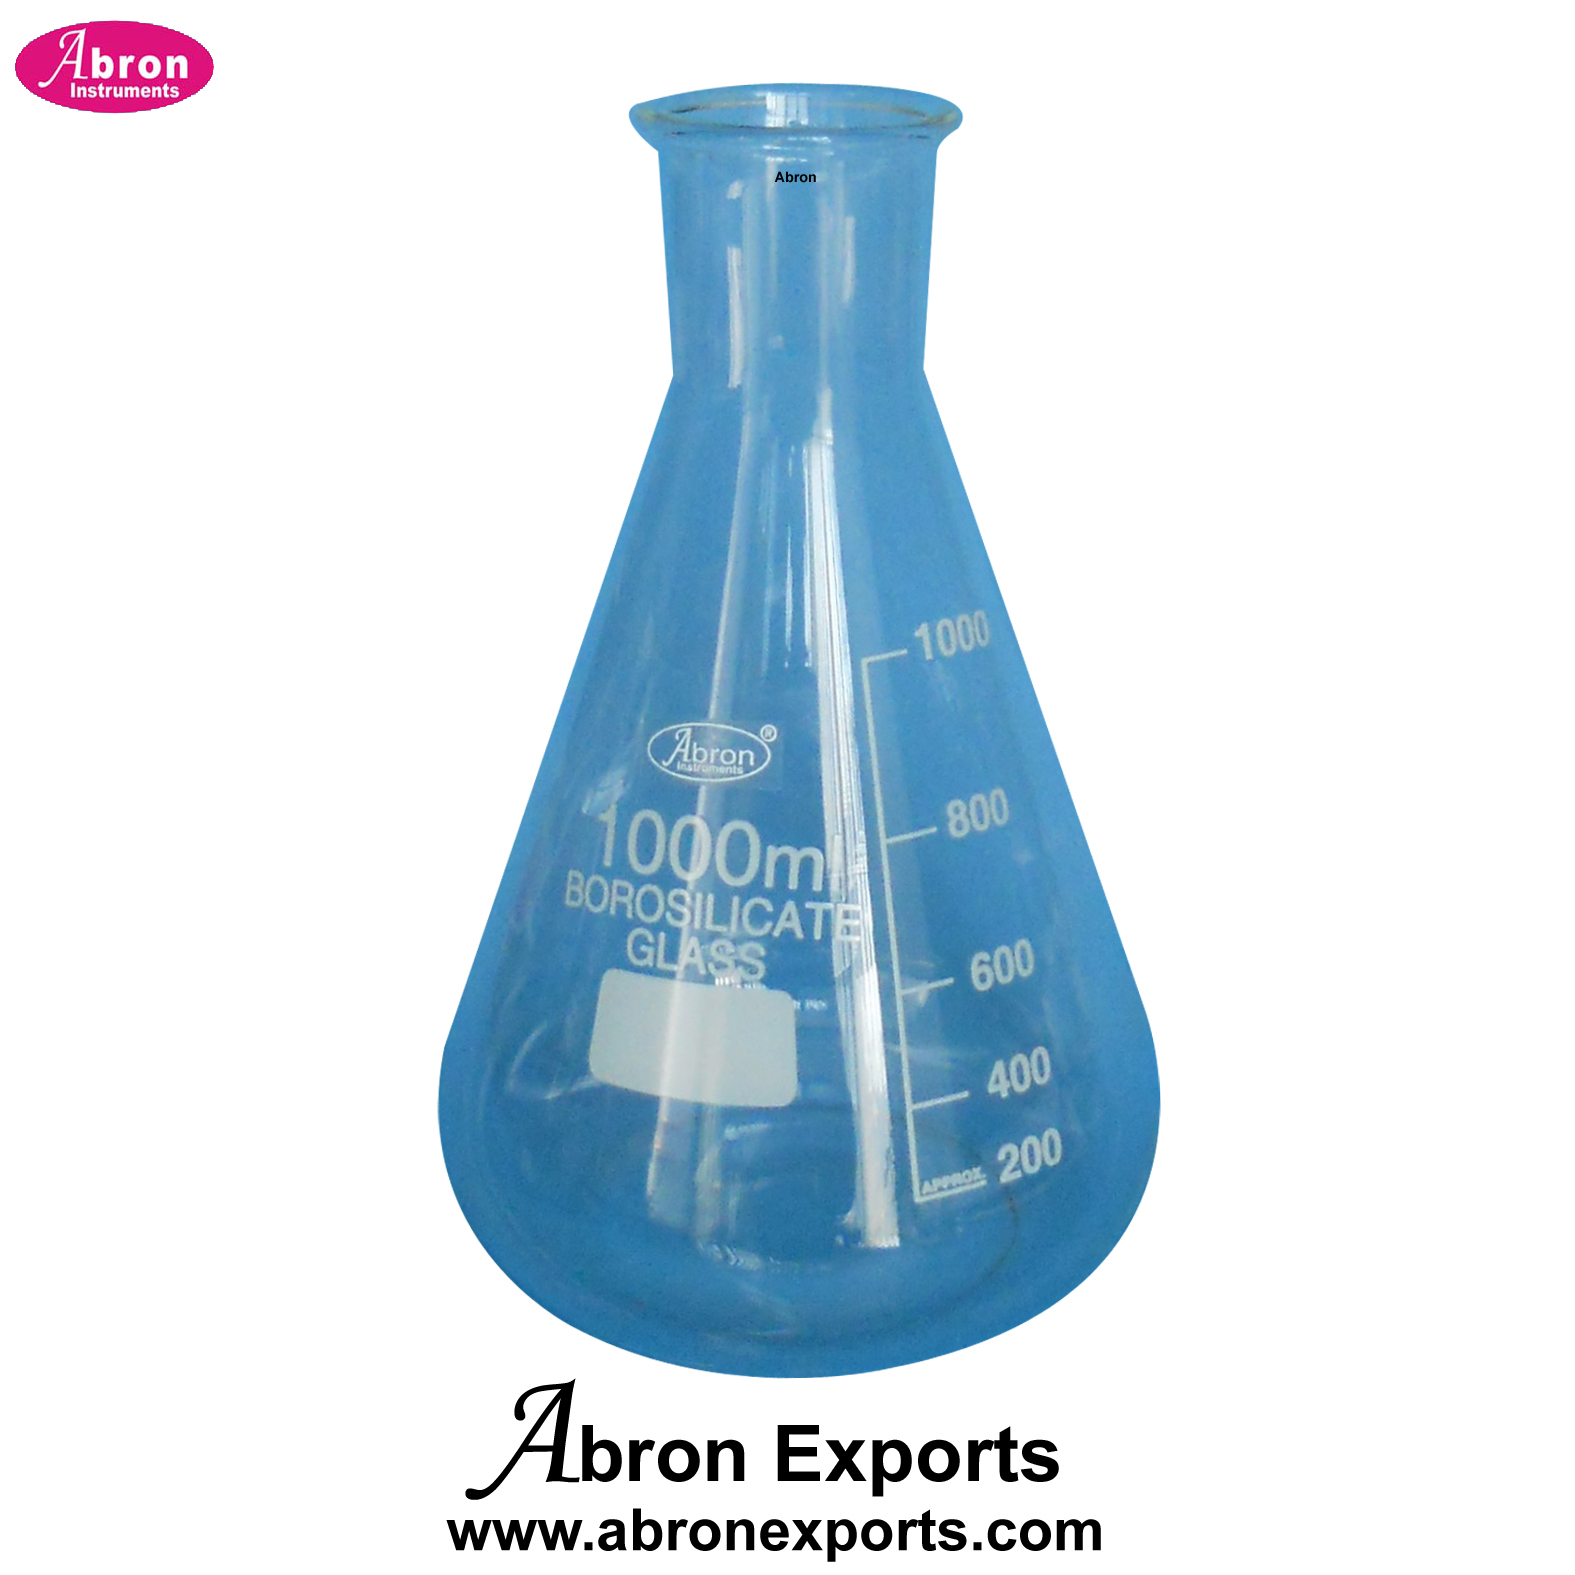 EC-049.3F Flasks Conical Erlenmeyer Flask Narrow Mouth 500ml cm3 Abron